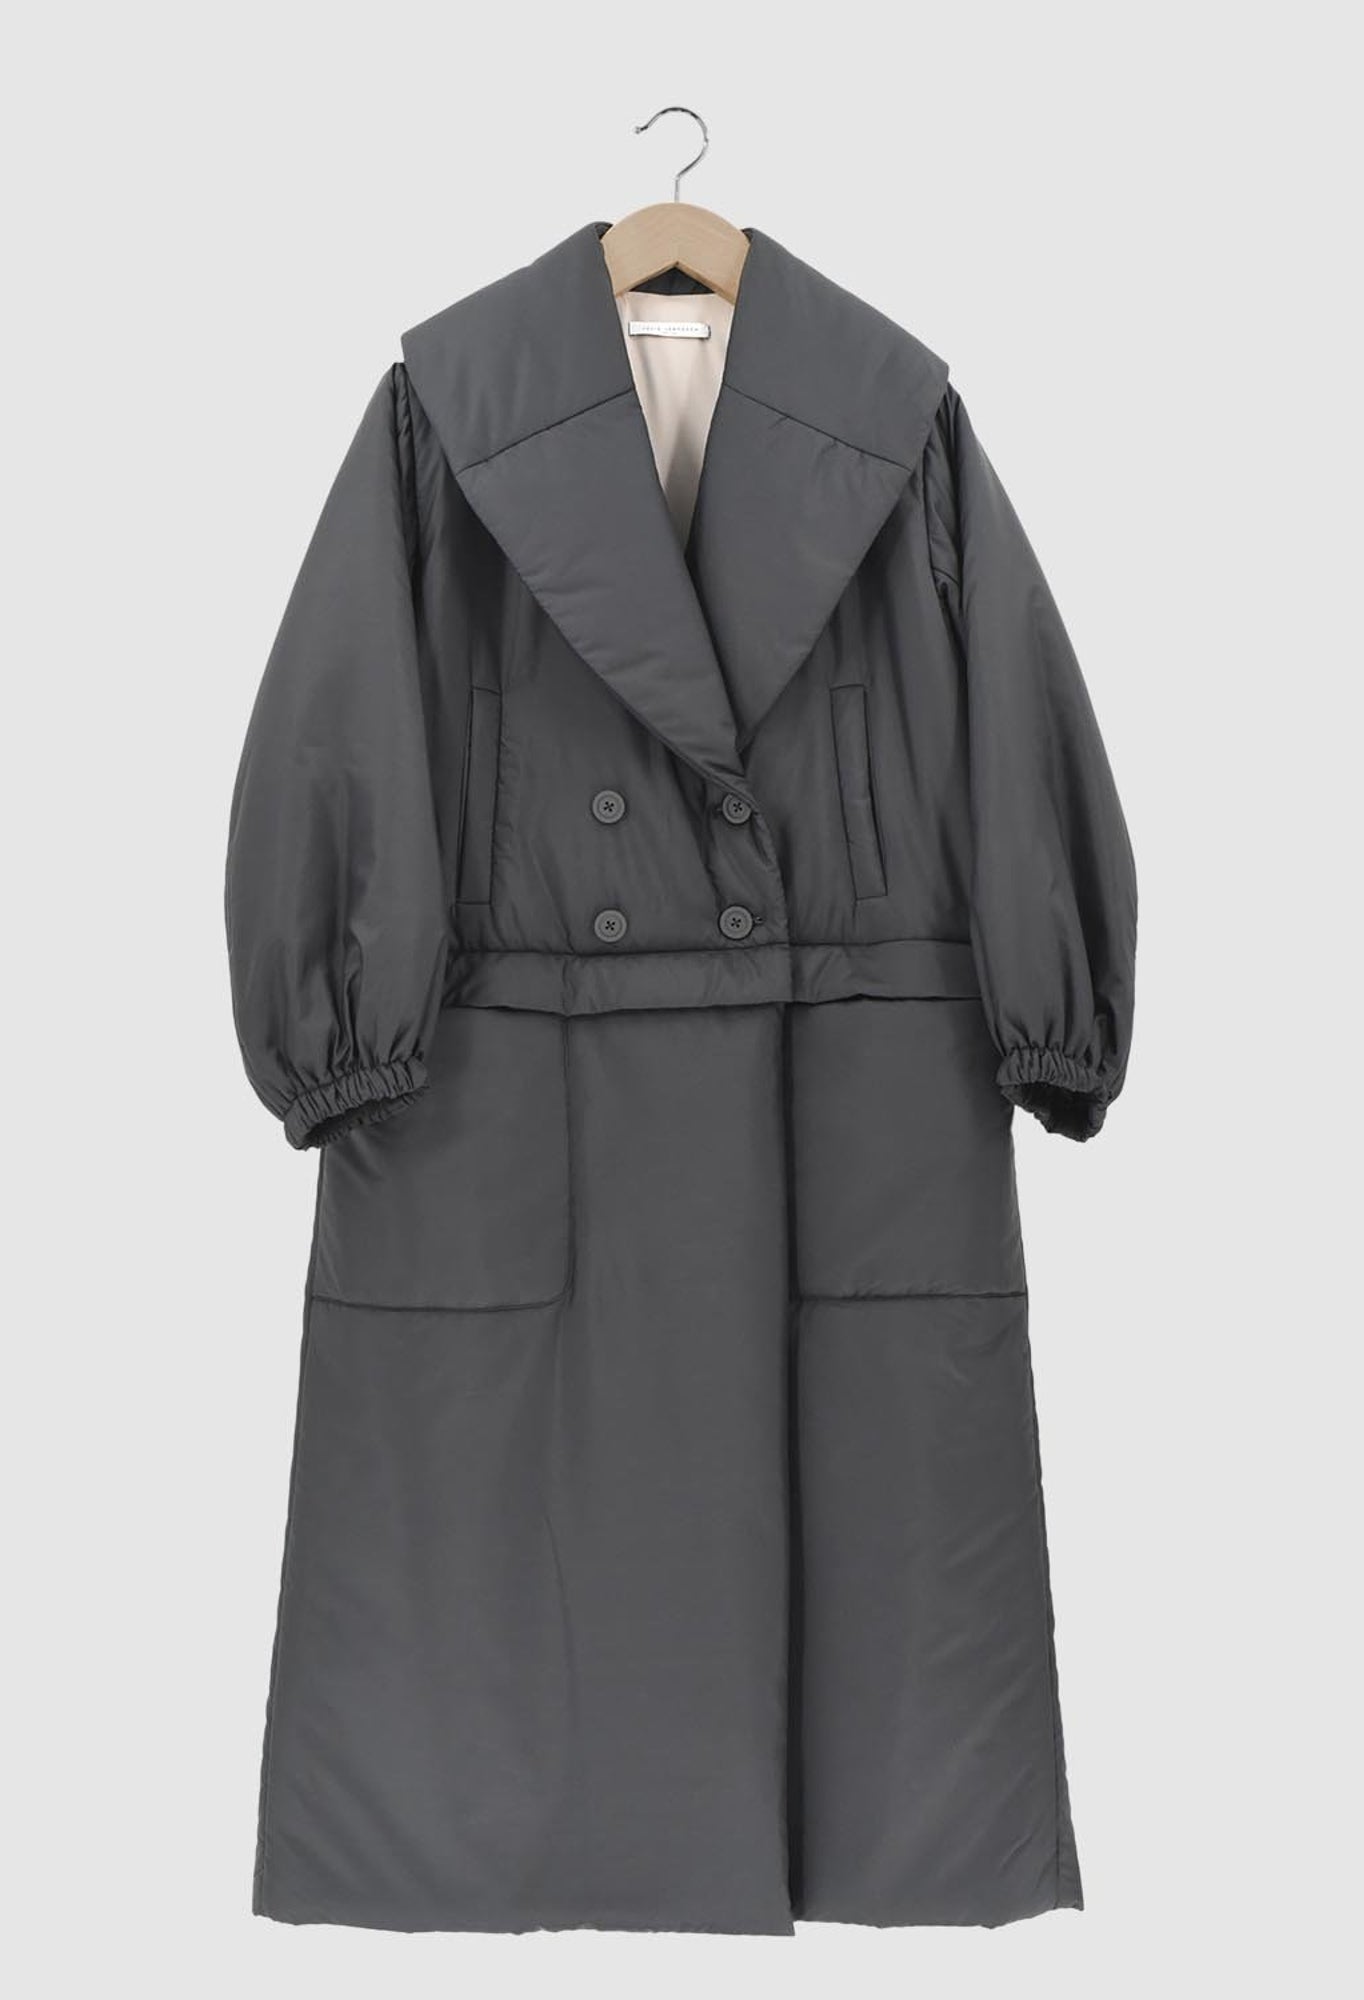 WENDELINE - ECO DOWN Coat in Black with Cloud Lining